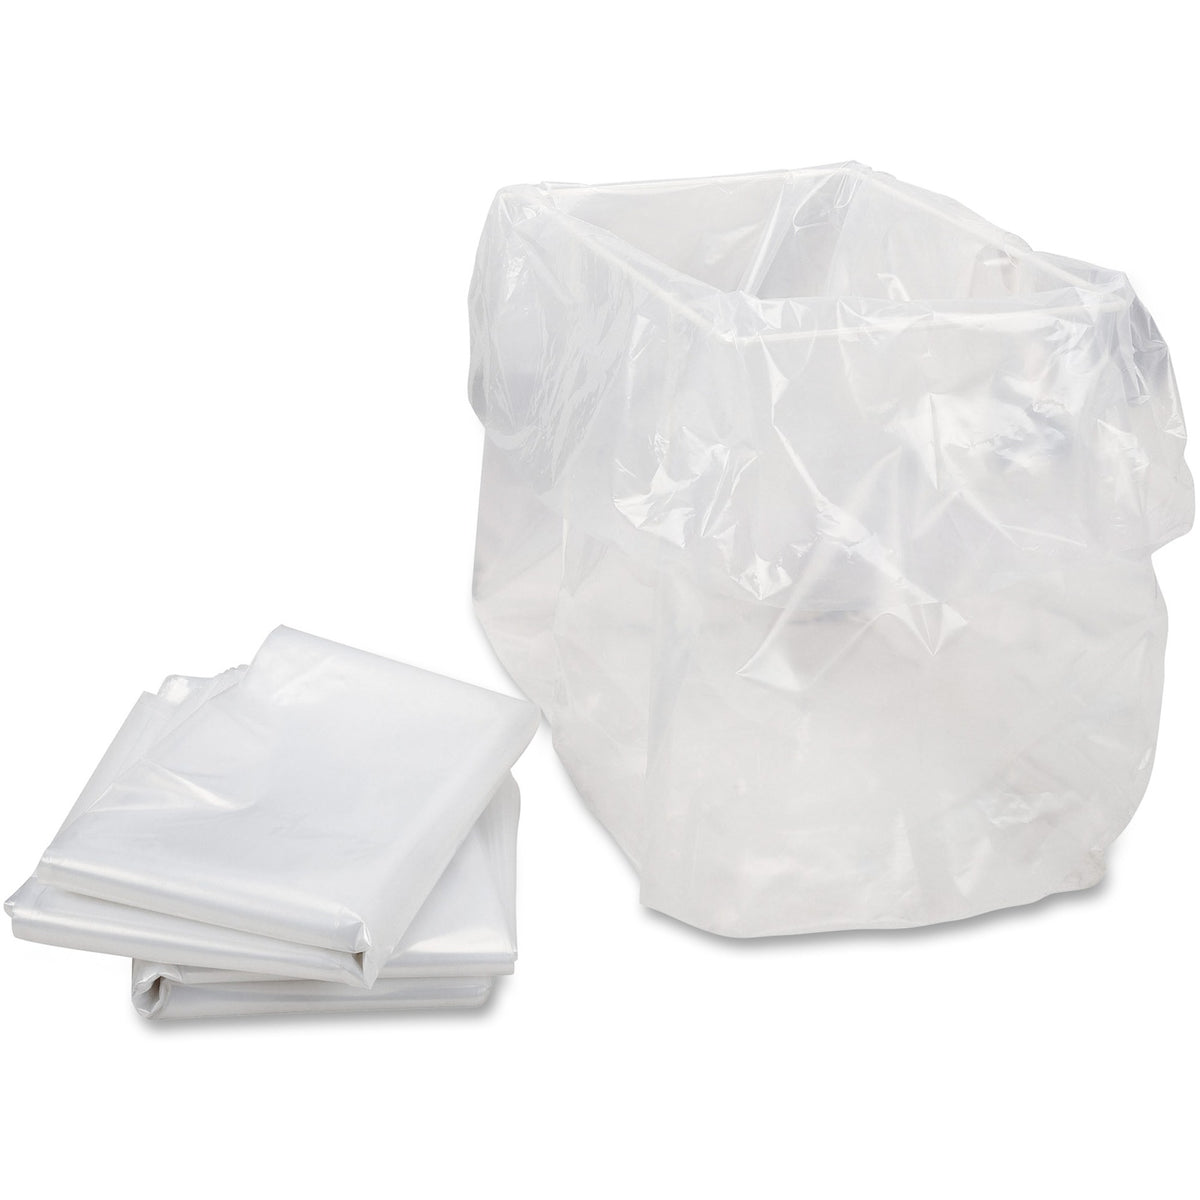 HSM Shredder Bags - fits Classic 104, 105, SECURIO B22, Pure 120, 220, 320, 420 and all other small machine models, HSM3310000001